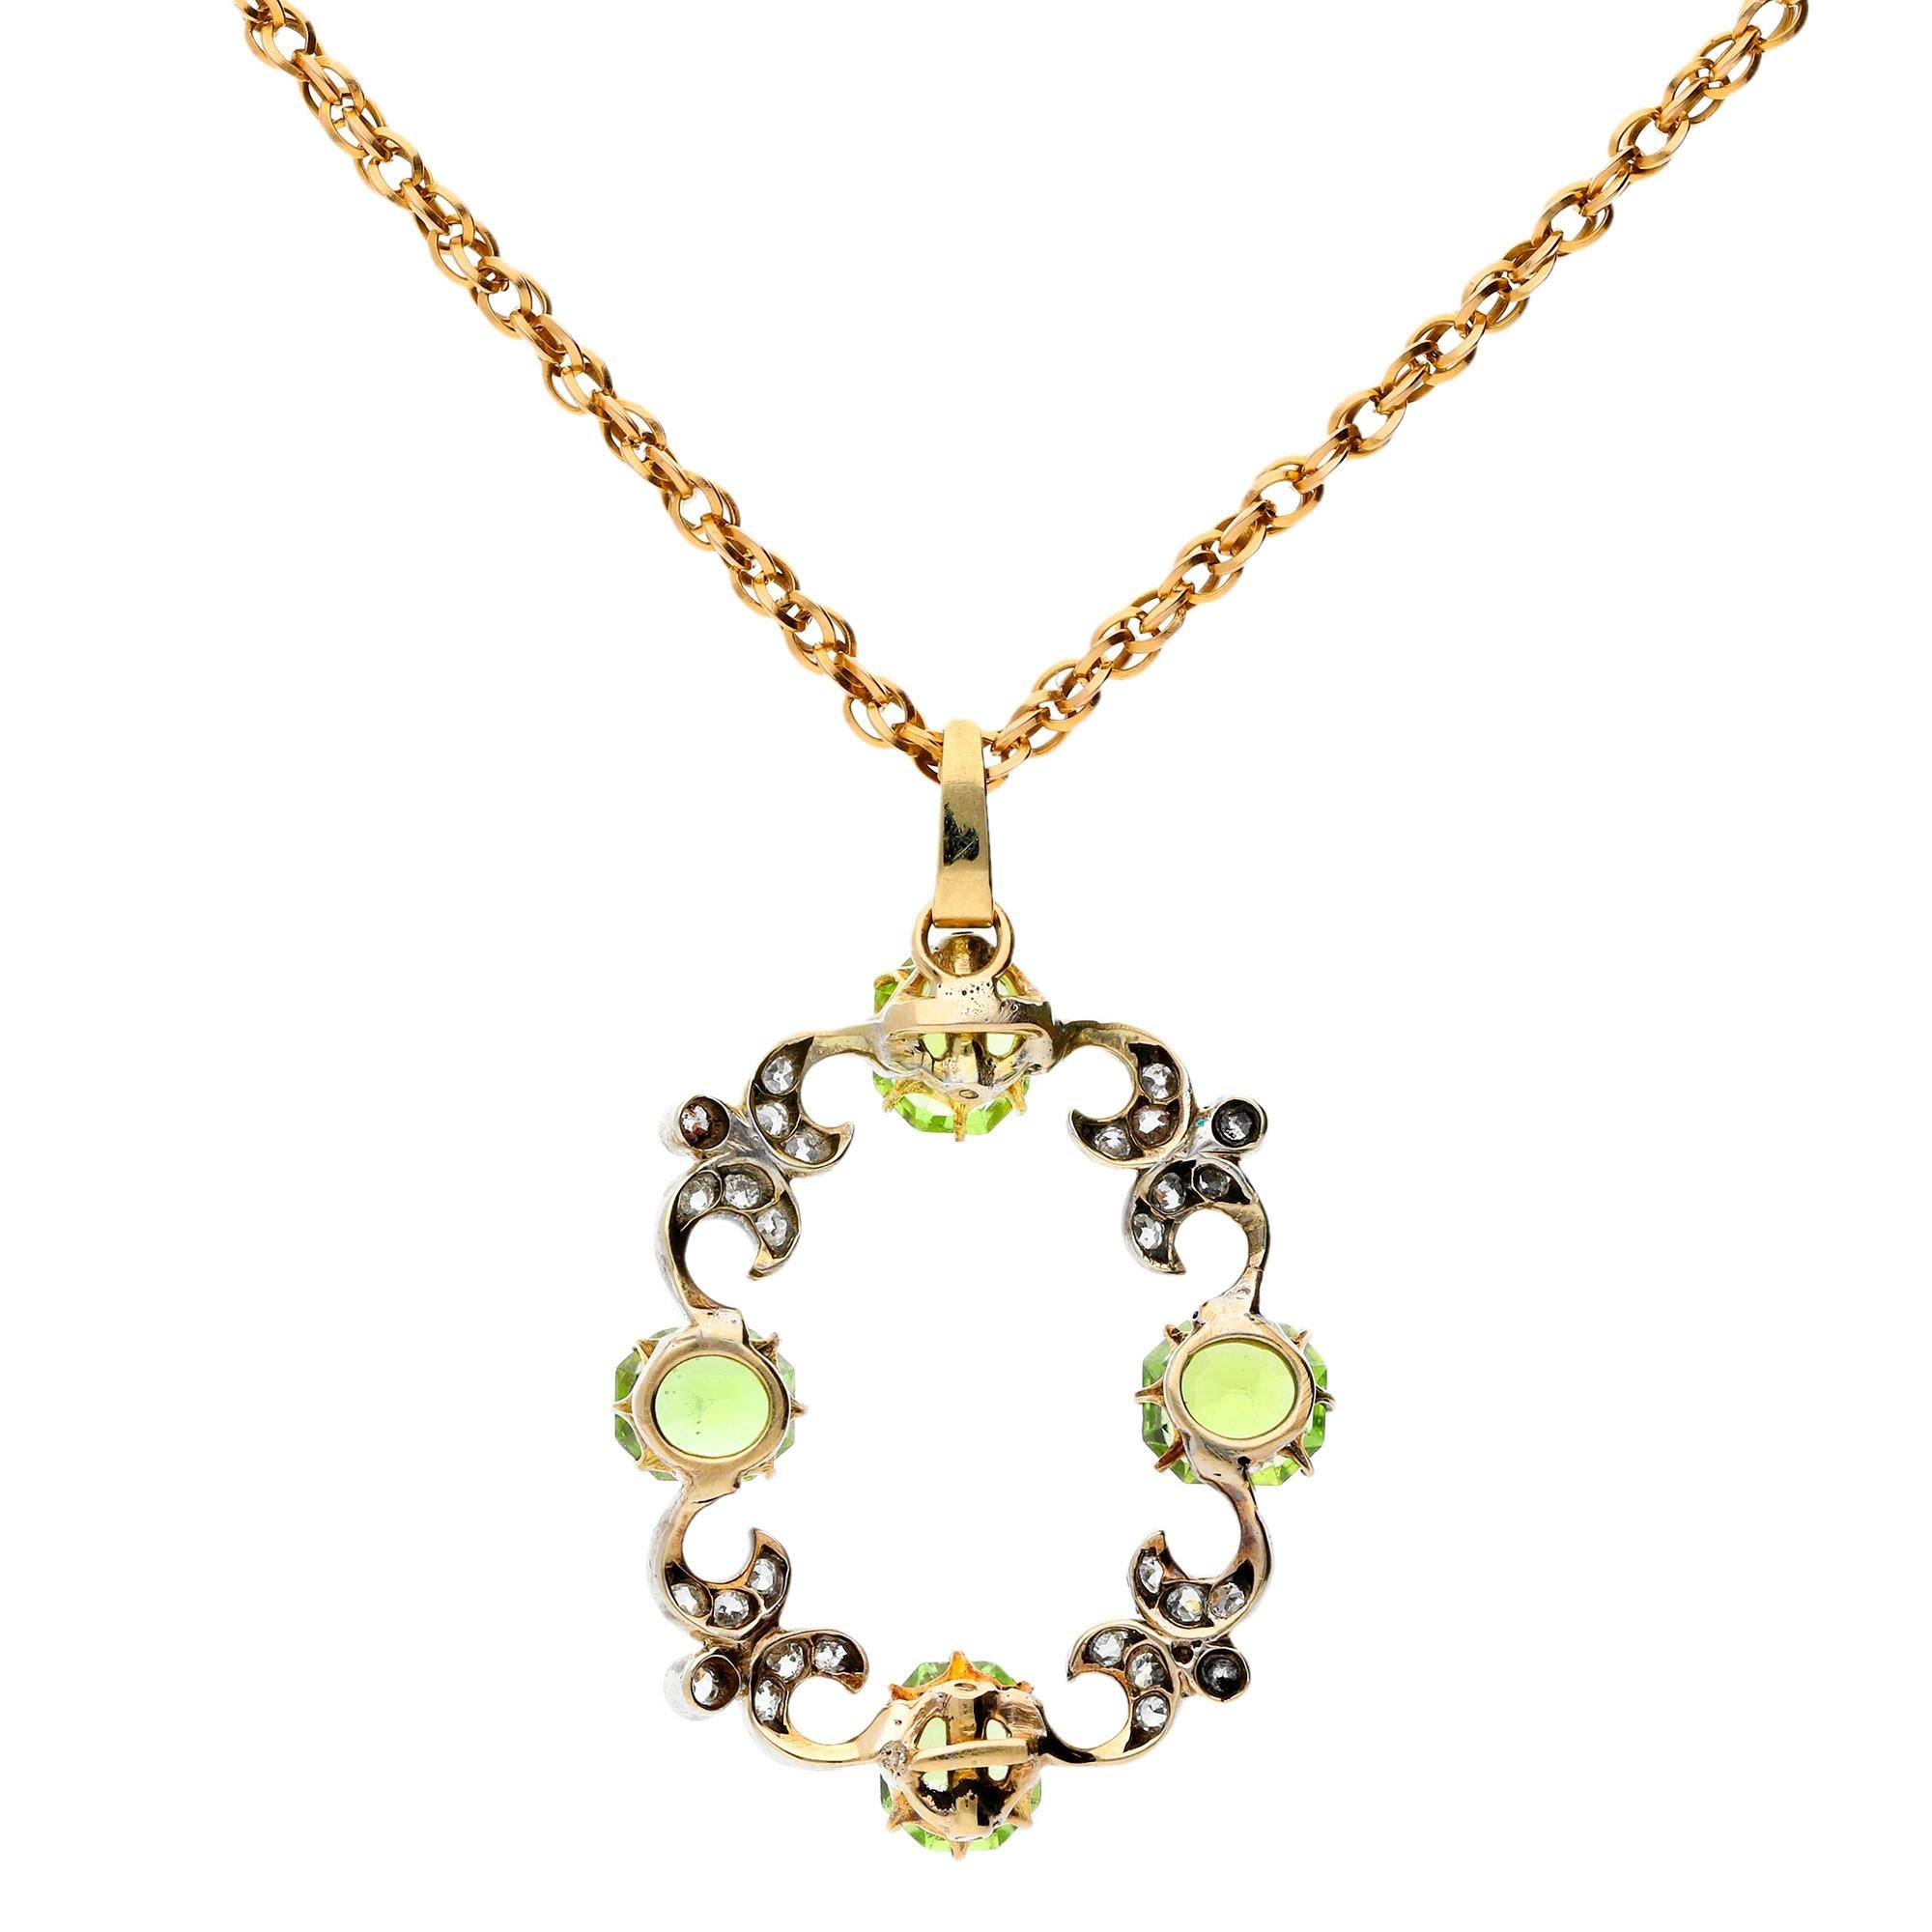 DESCRIPTION
This beautiful openwork pendant, decorated with twinkling diamond scrolls, enhanced by delicious peridot quarterly highlights. As most creations from the turn of the Century, this pendant is crafted from 9ct yellow gold with beautiful